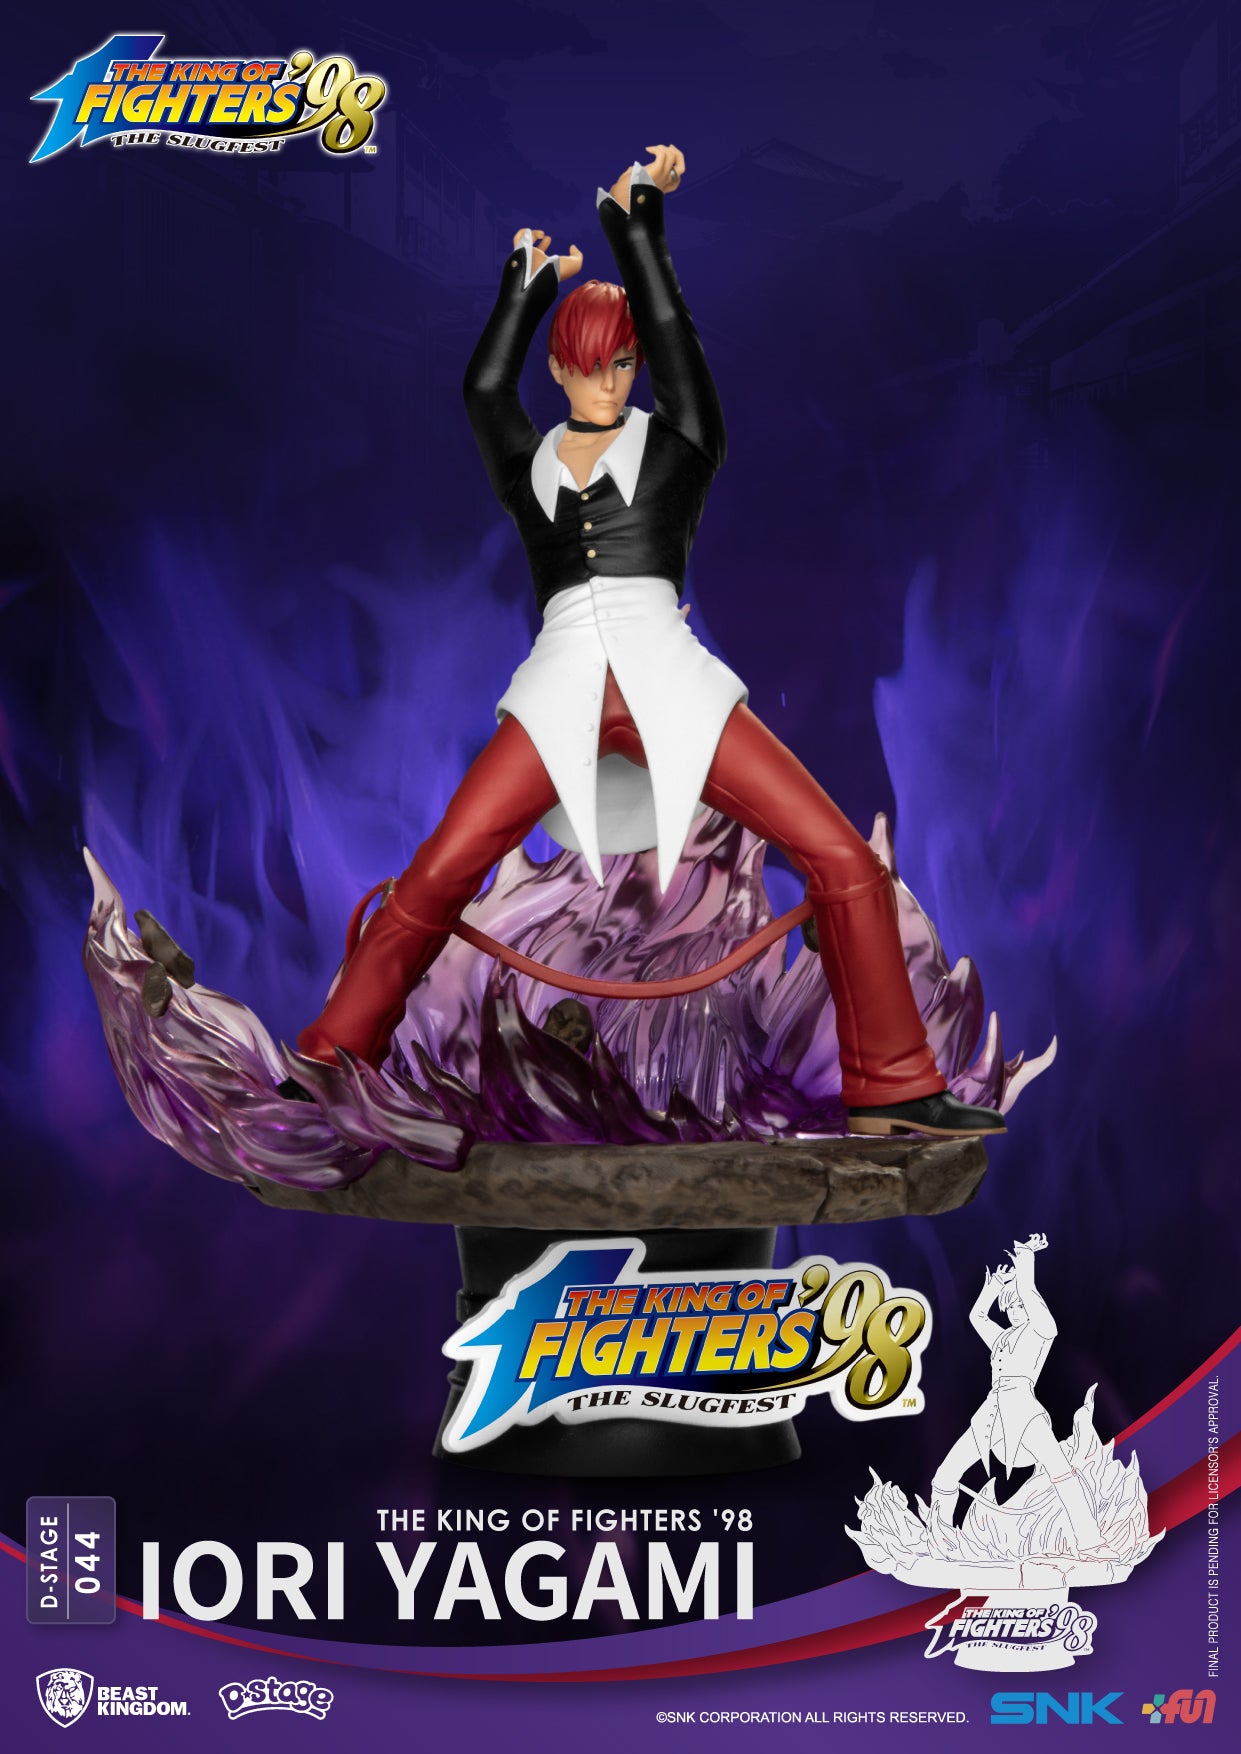 The King of Fighters 98-Iori Yagami (D-Stage)